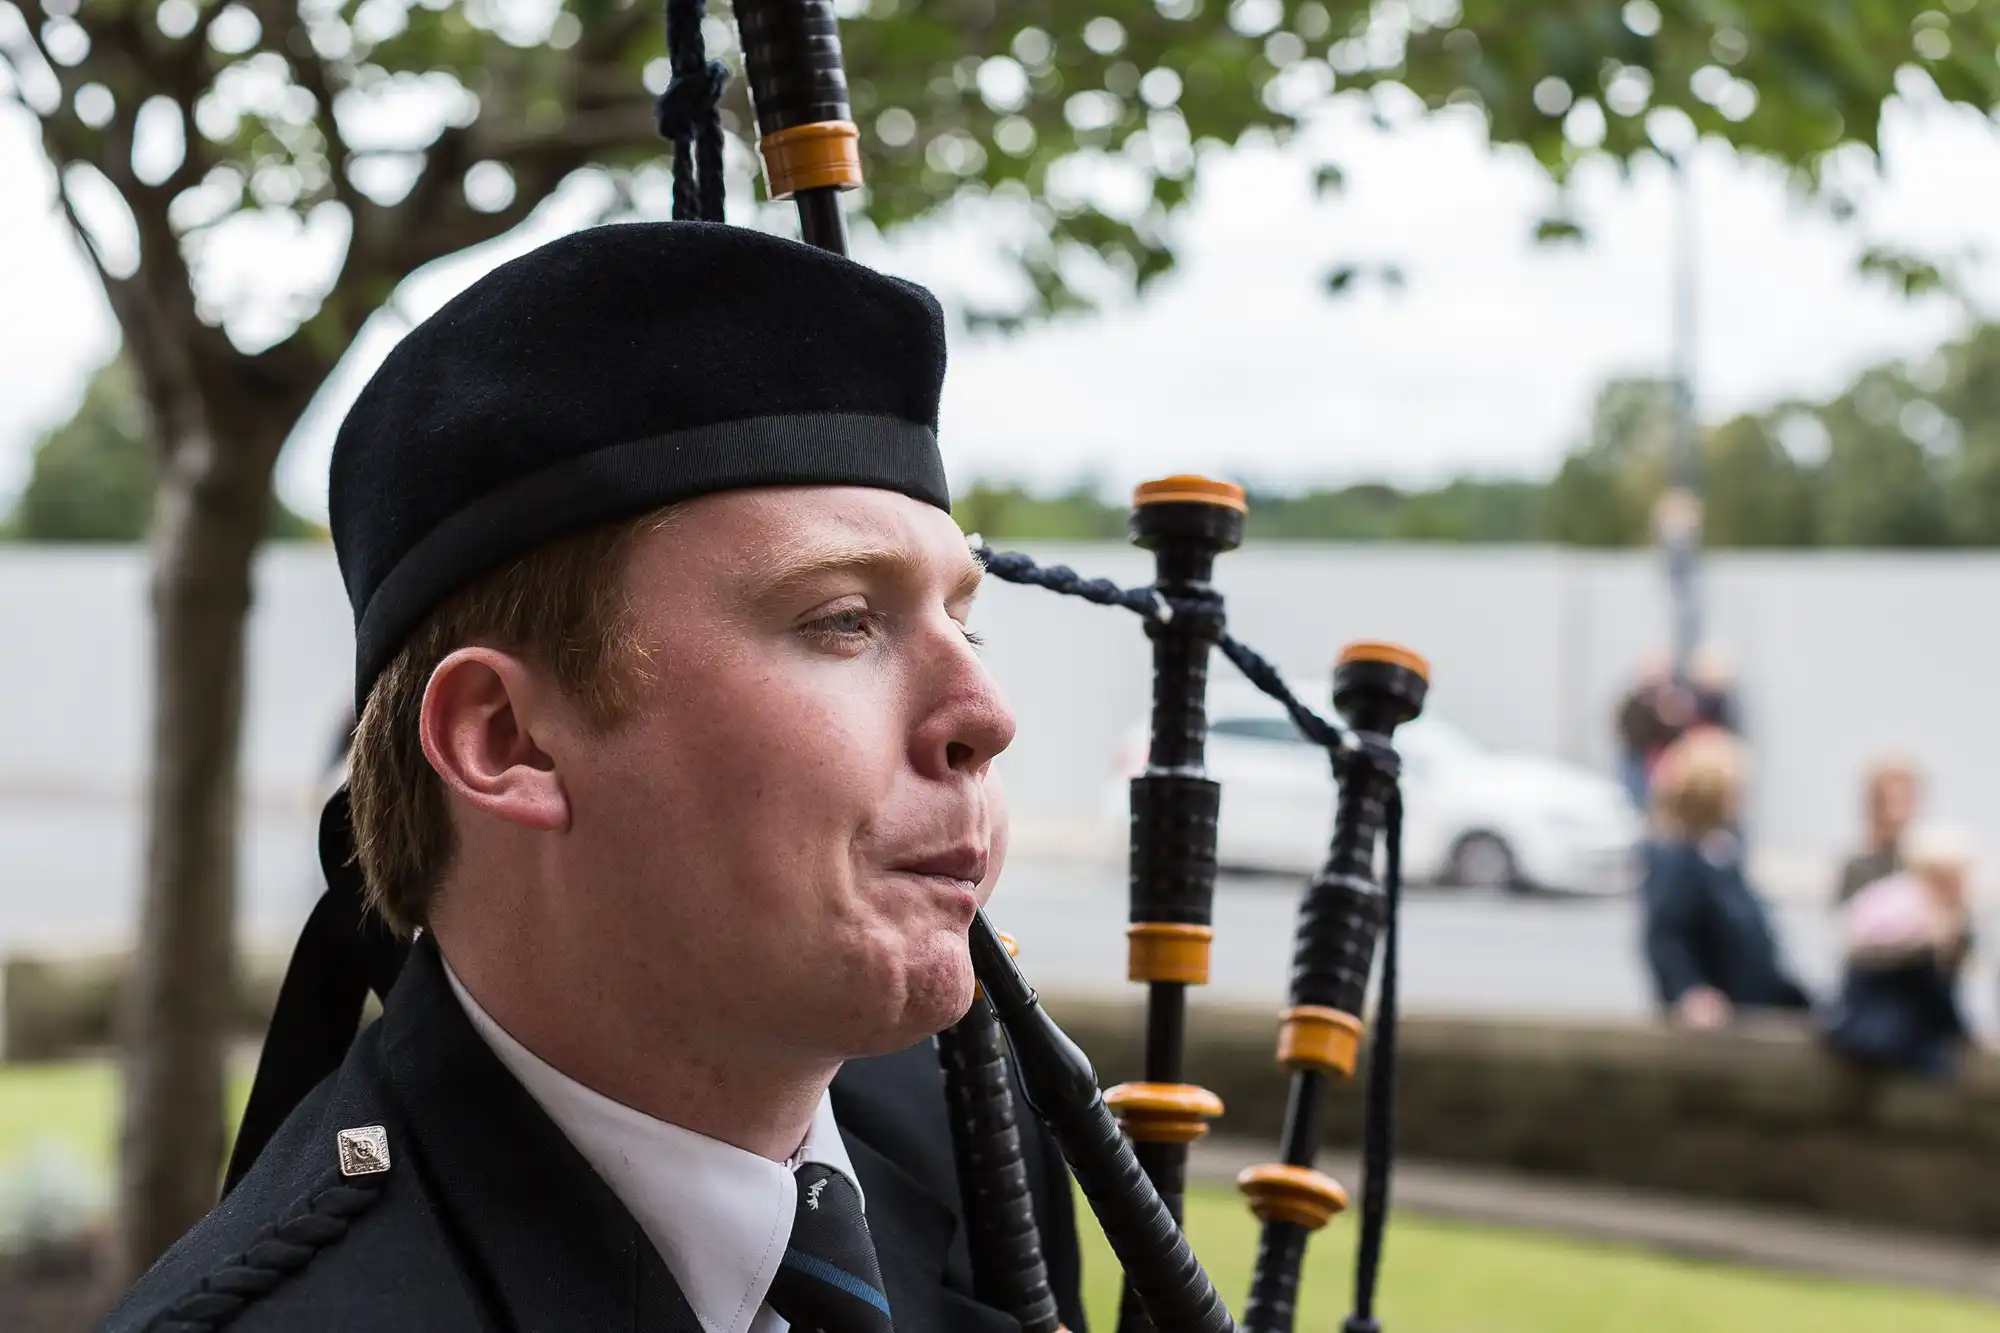 A man in a traditional scottish outfit playing the bagpipes outdoors, with a focused expression and people sitting in the background.